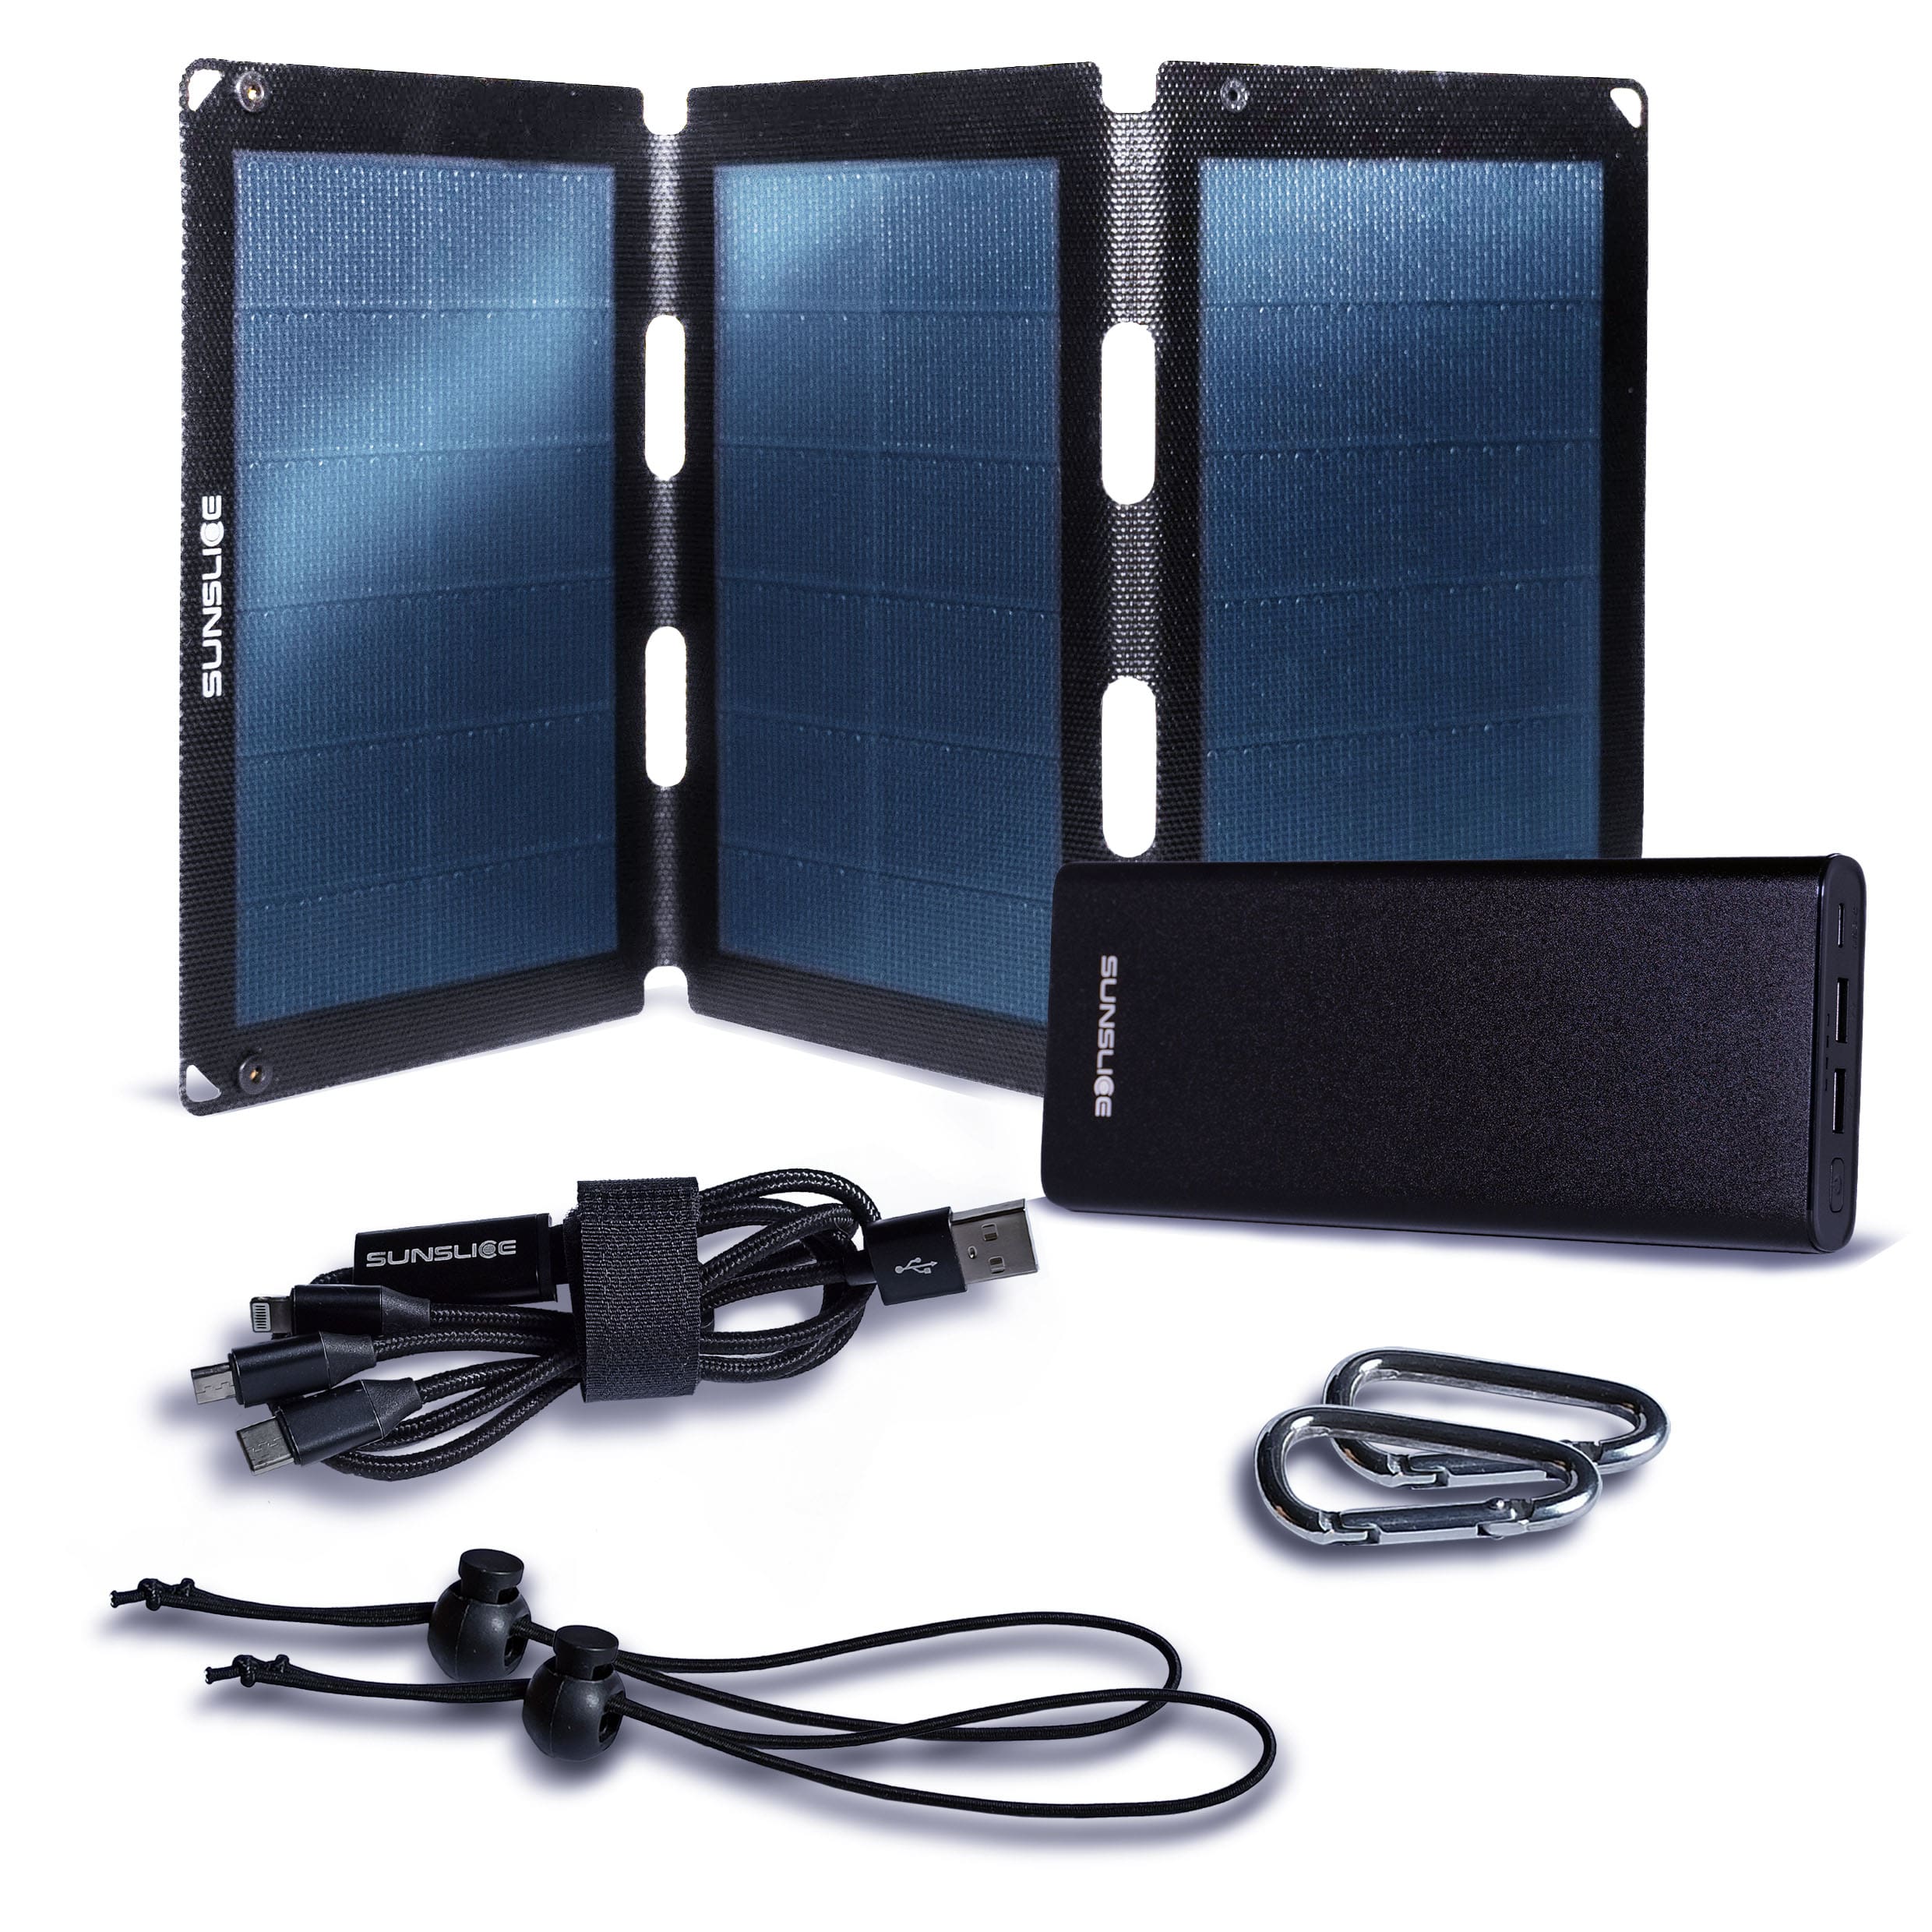 Kit with a solar panel fusion flex 18 and a Gravity 100 power bank for laptop + 2 carabiner , 2 elastic band, 1 trident cable